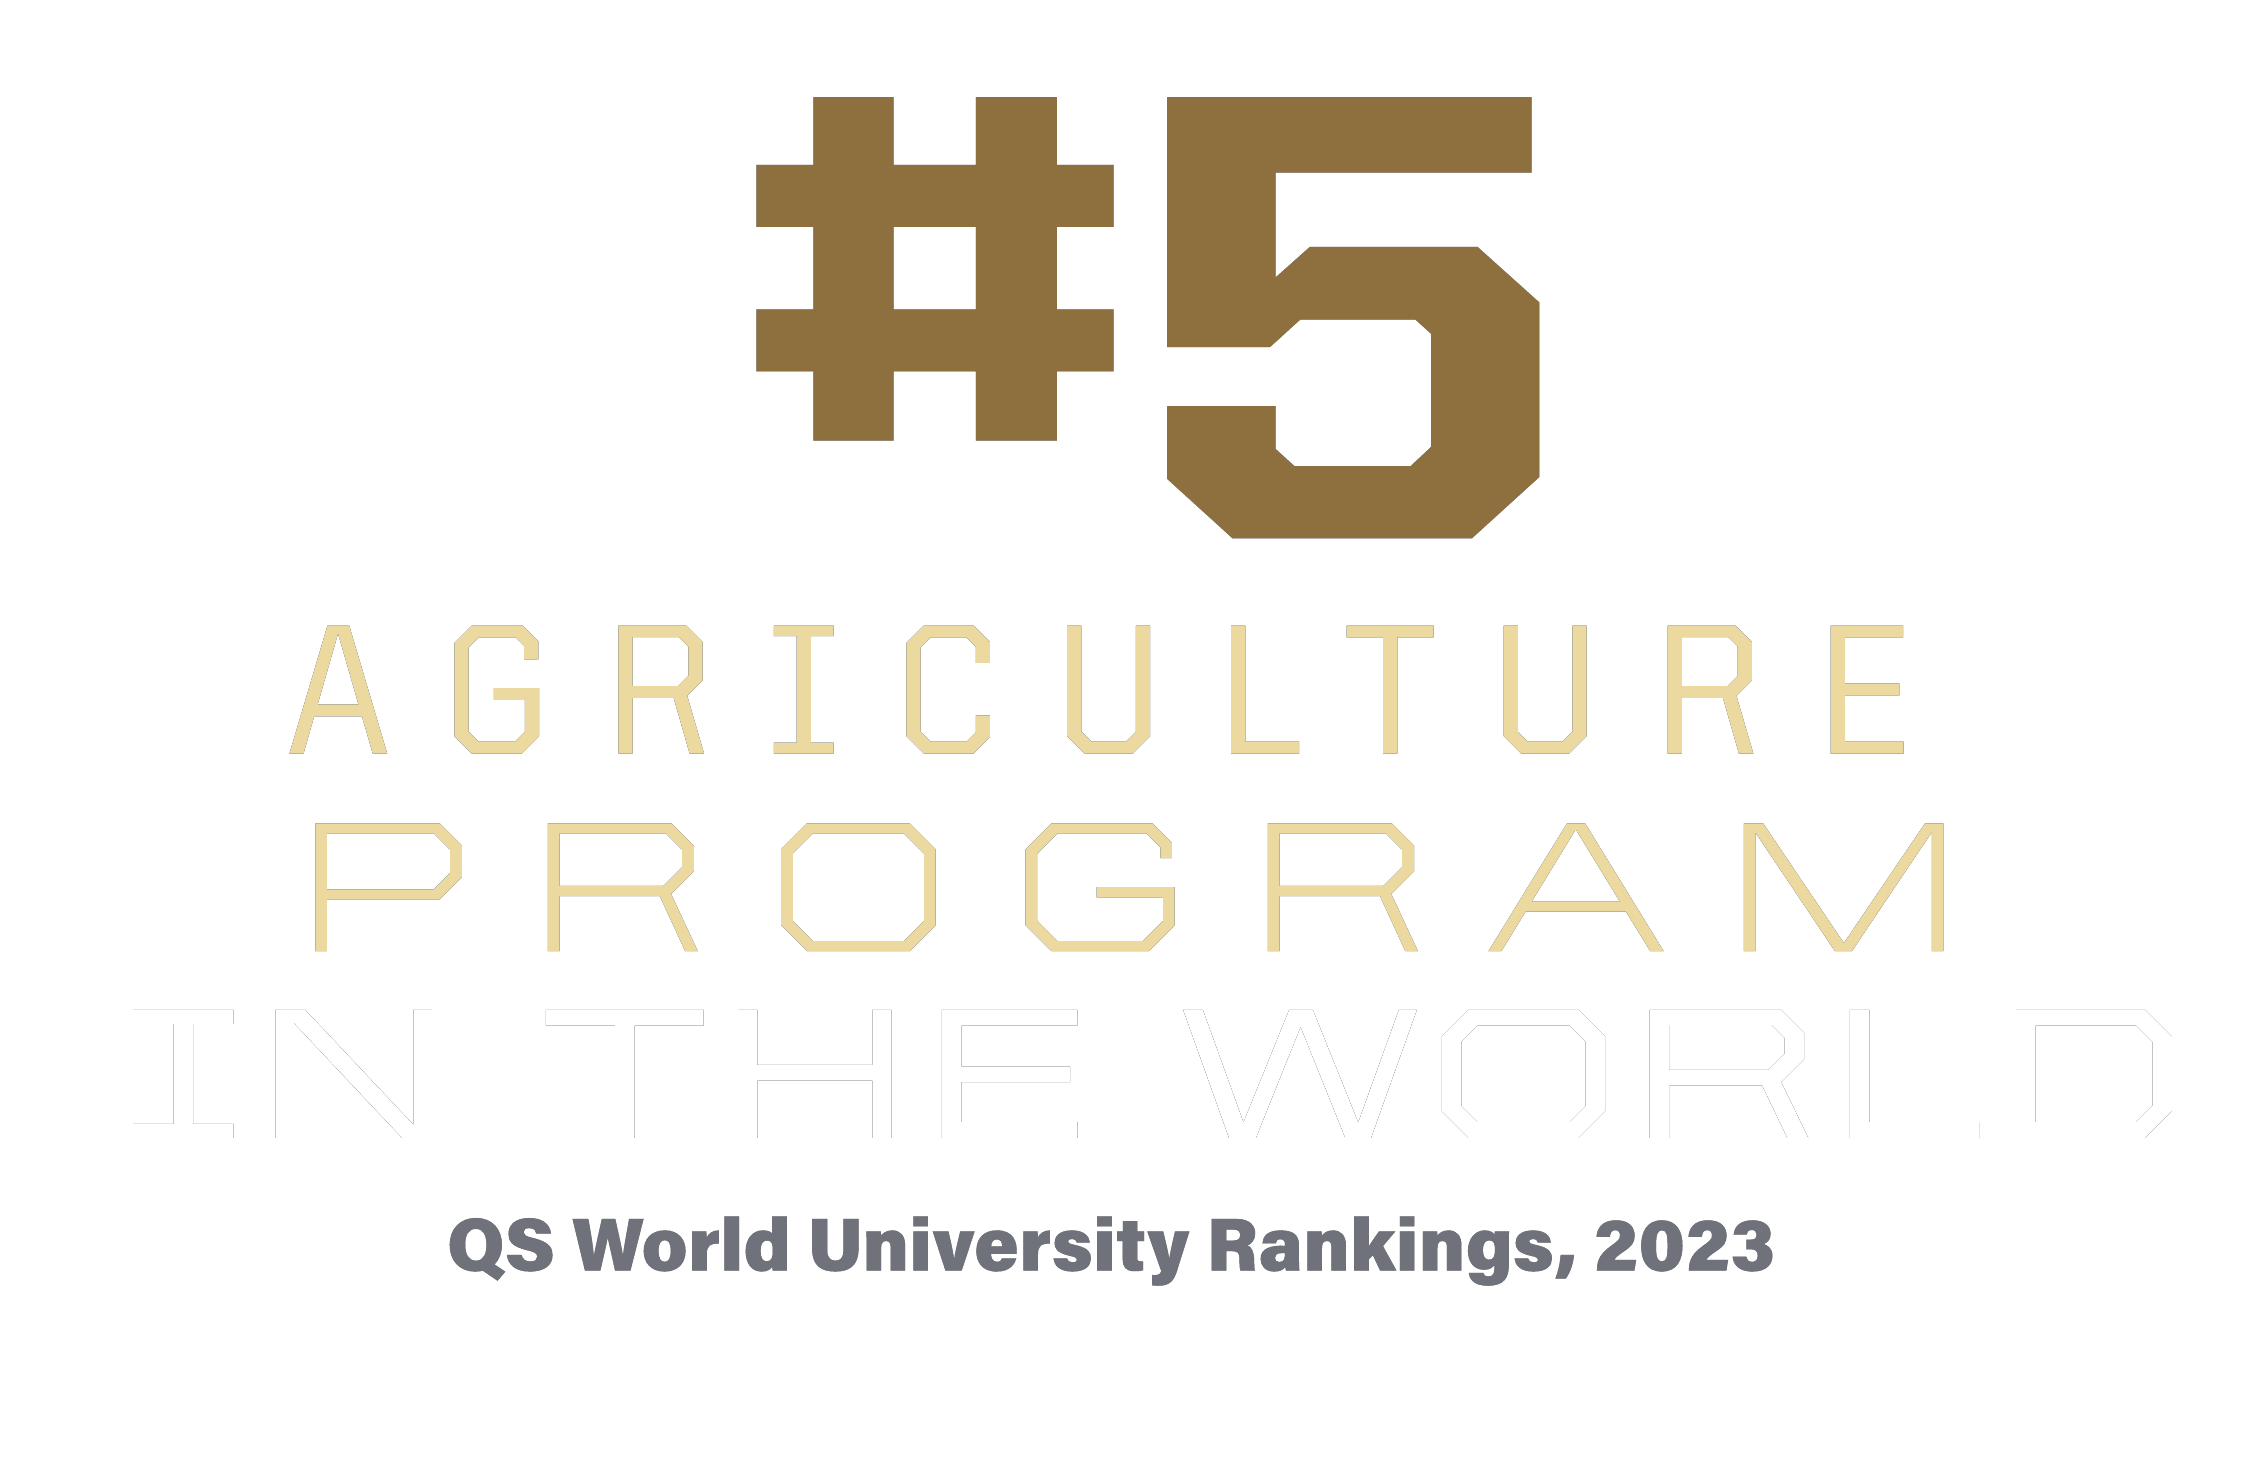 #5 agriculture program in the world